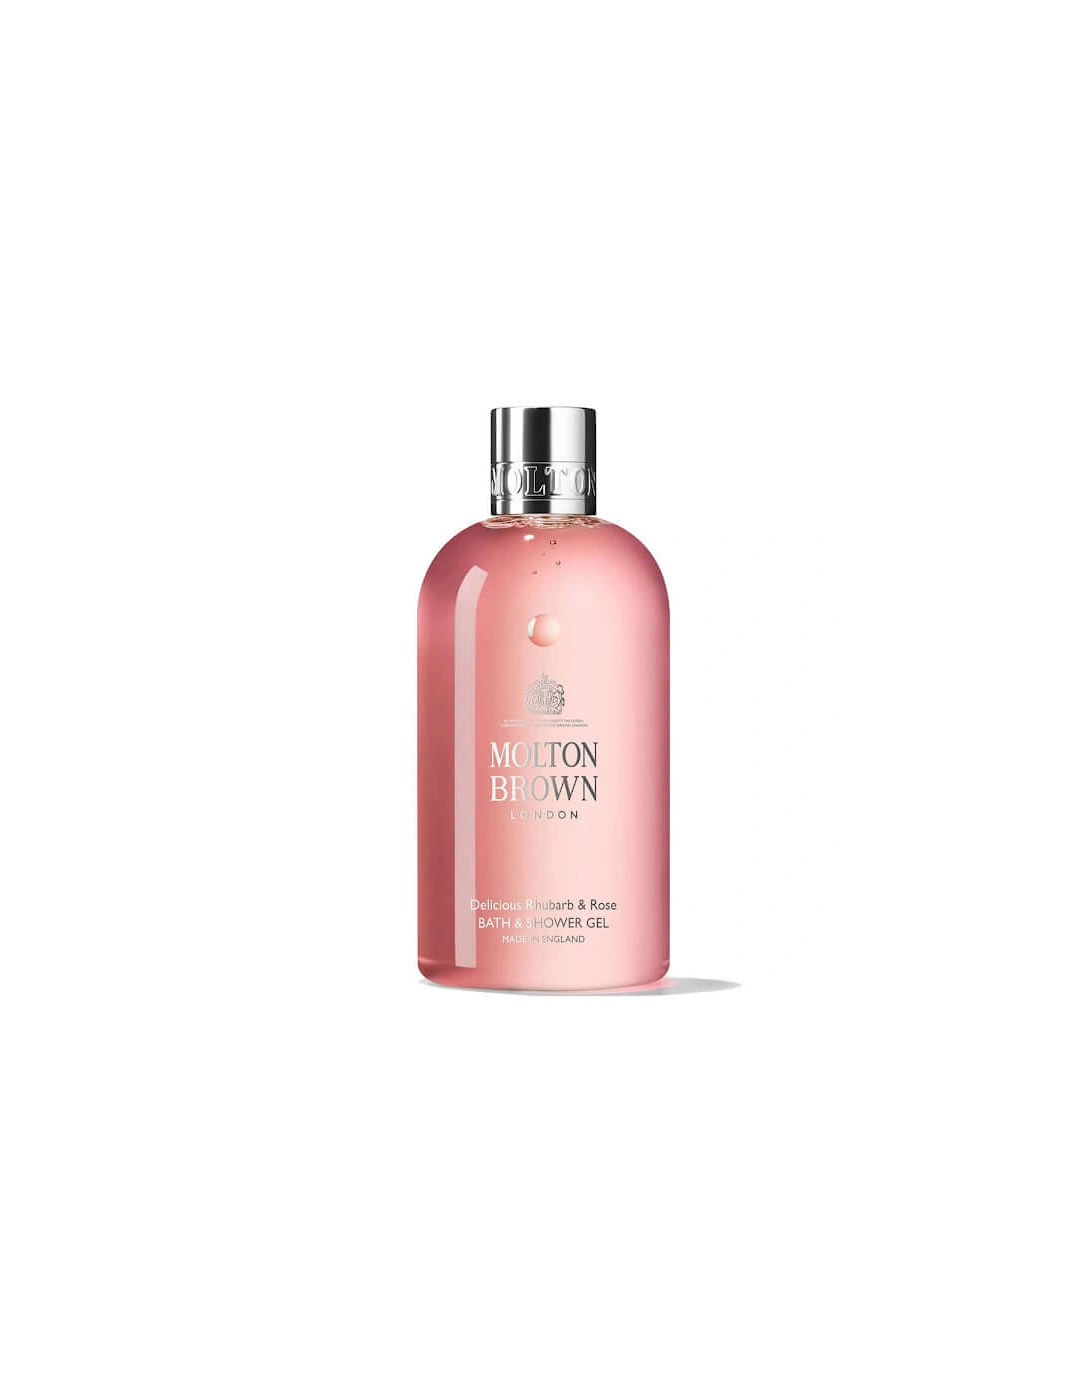 Delicious Rhubarb and Rose Bath and Shower Gel 300ml - - Delicious Rhubarb and Rose Bath and Shower Gel (300ml) - Sally - Delicious Rhubarb and Rose Body Wash (300ml) - Patslap, 2 of 1